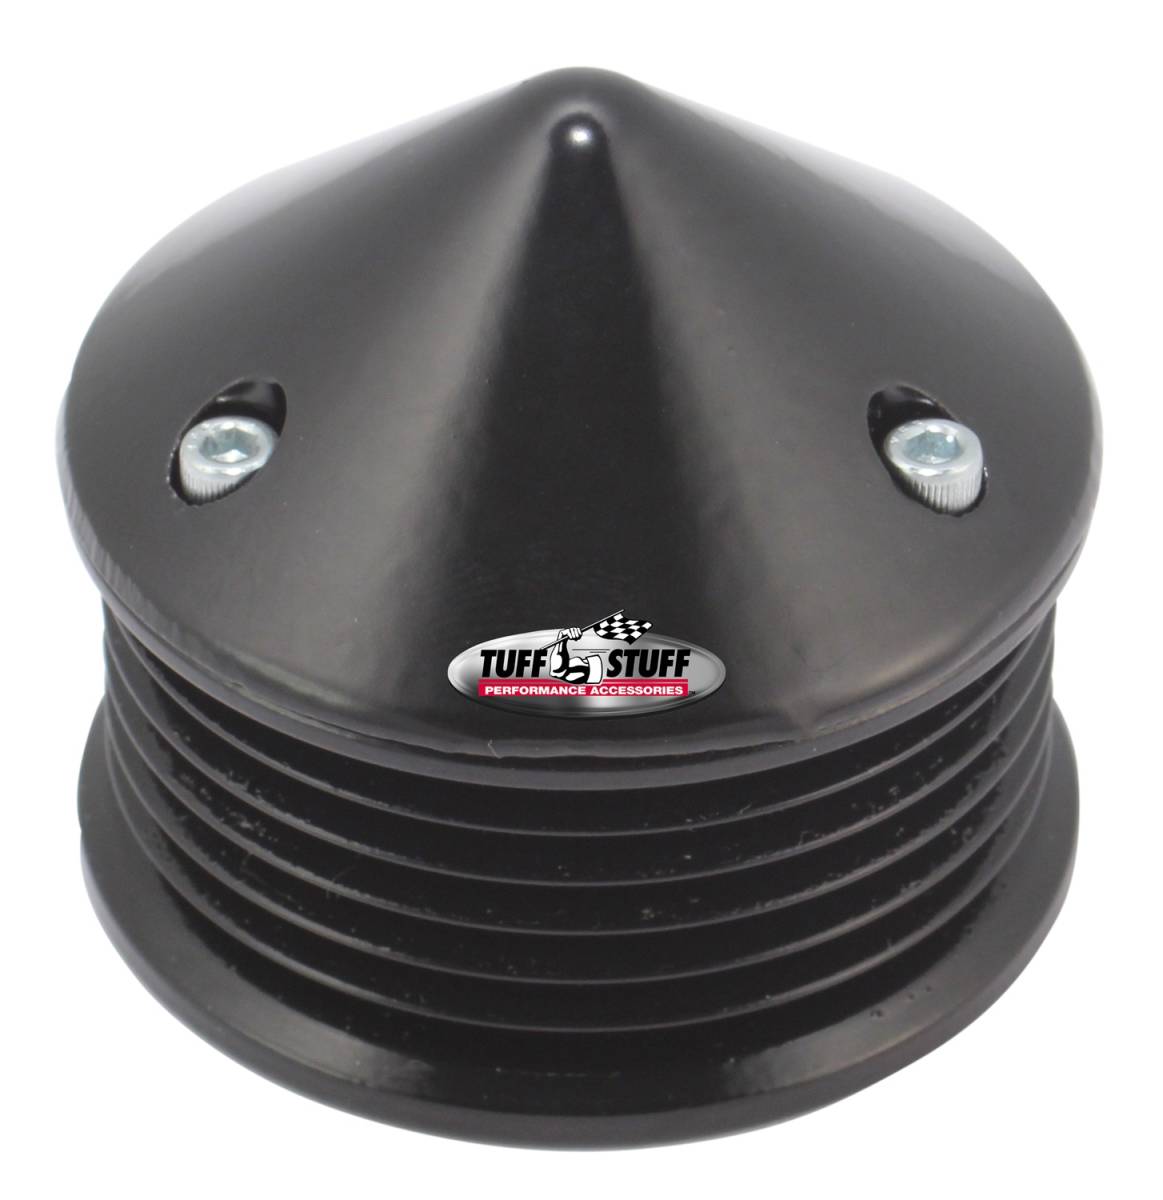 Tuff Stuff Performance - Alternator Pulley And Bullet Cover 2.25 in. Pulley 6 Groove Serpentine Incl. Lock Washer/Nut Stealth Black 7653C